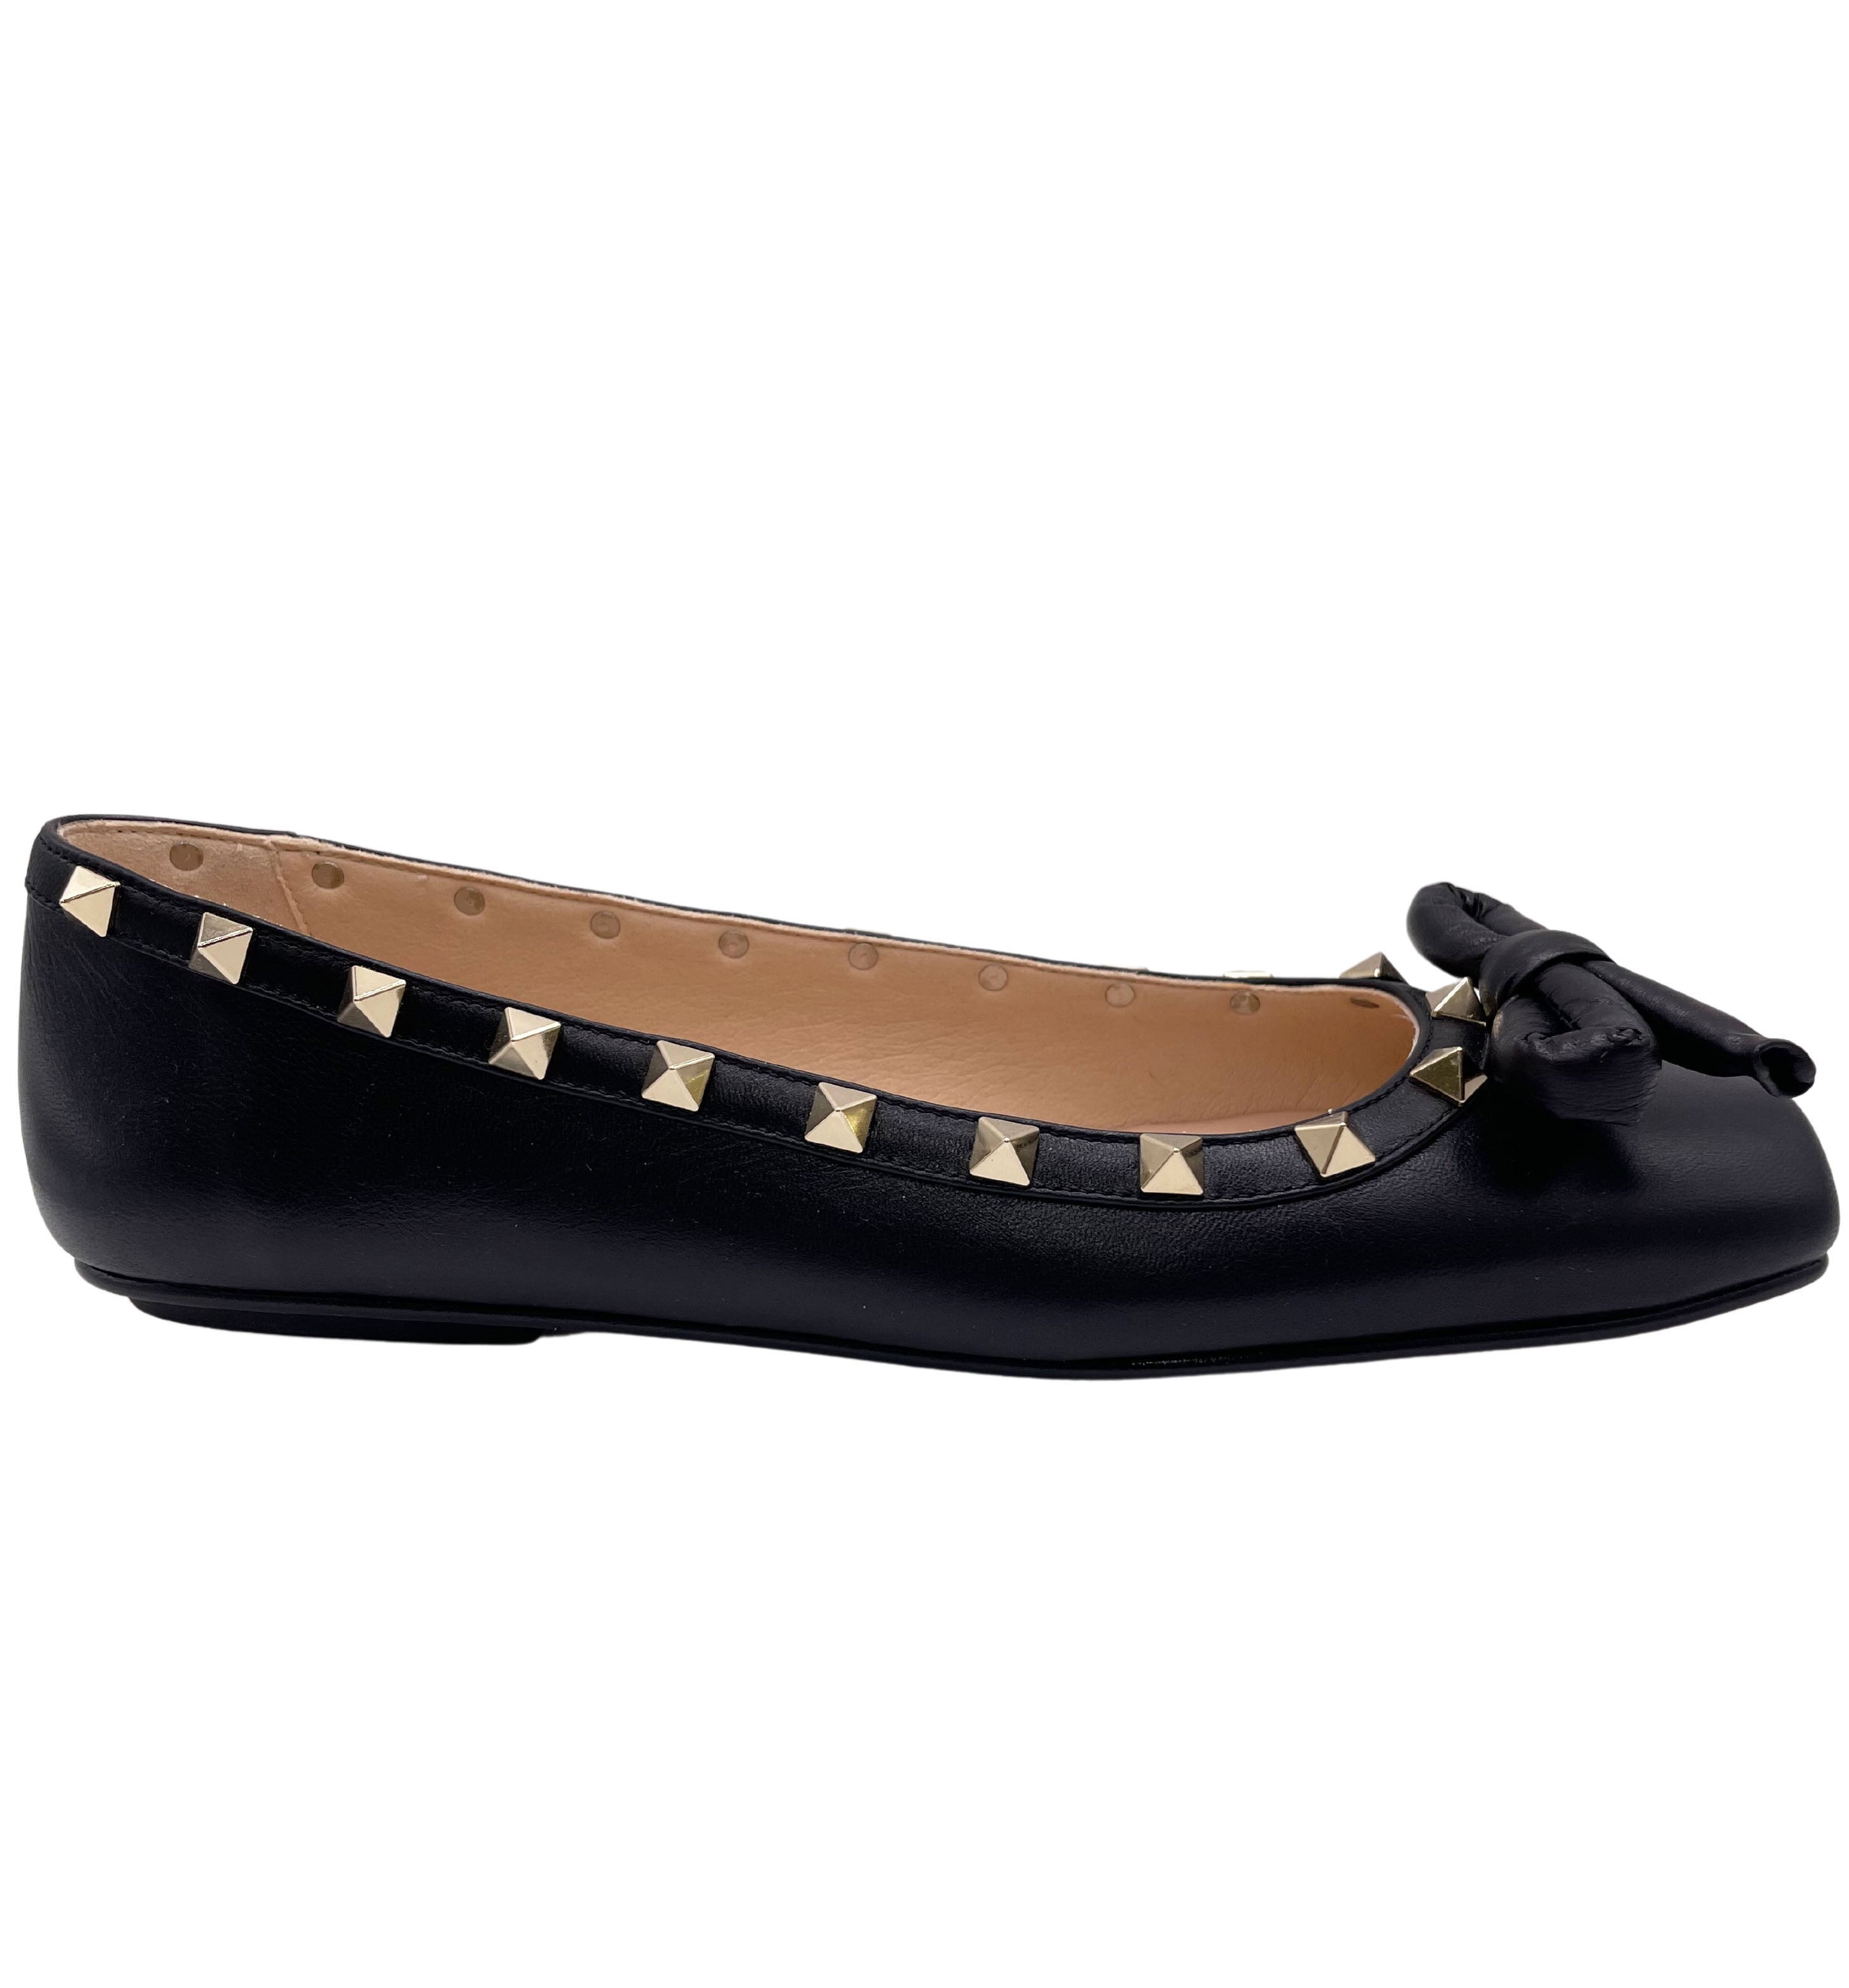 Ivy - Black Leather – French Sole